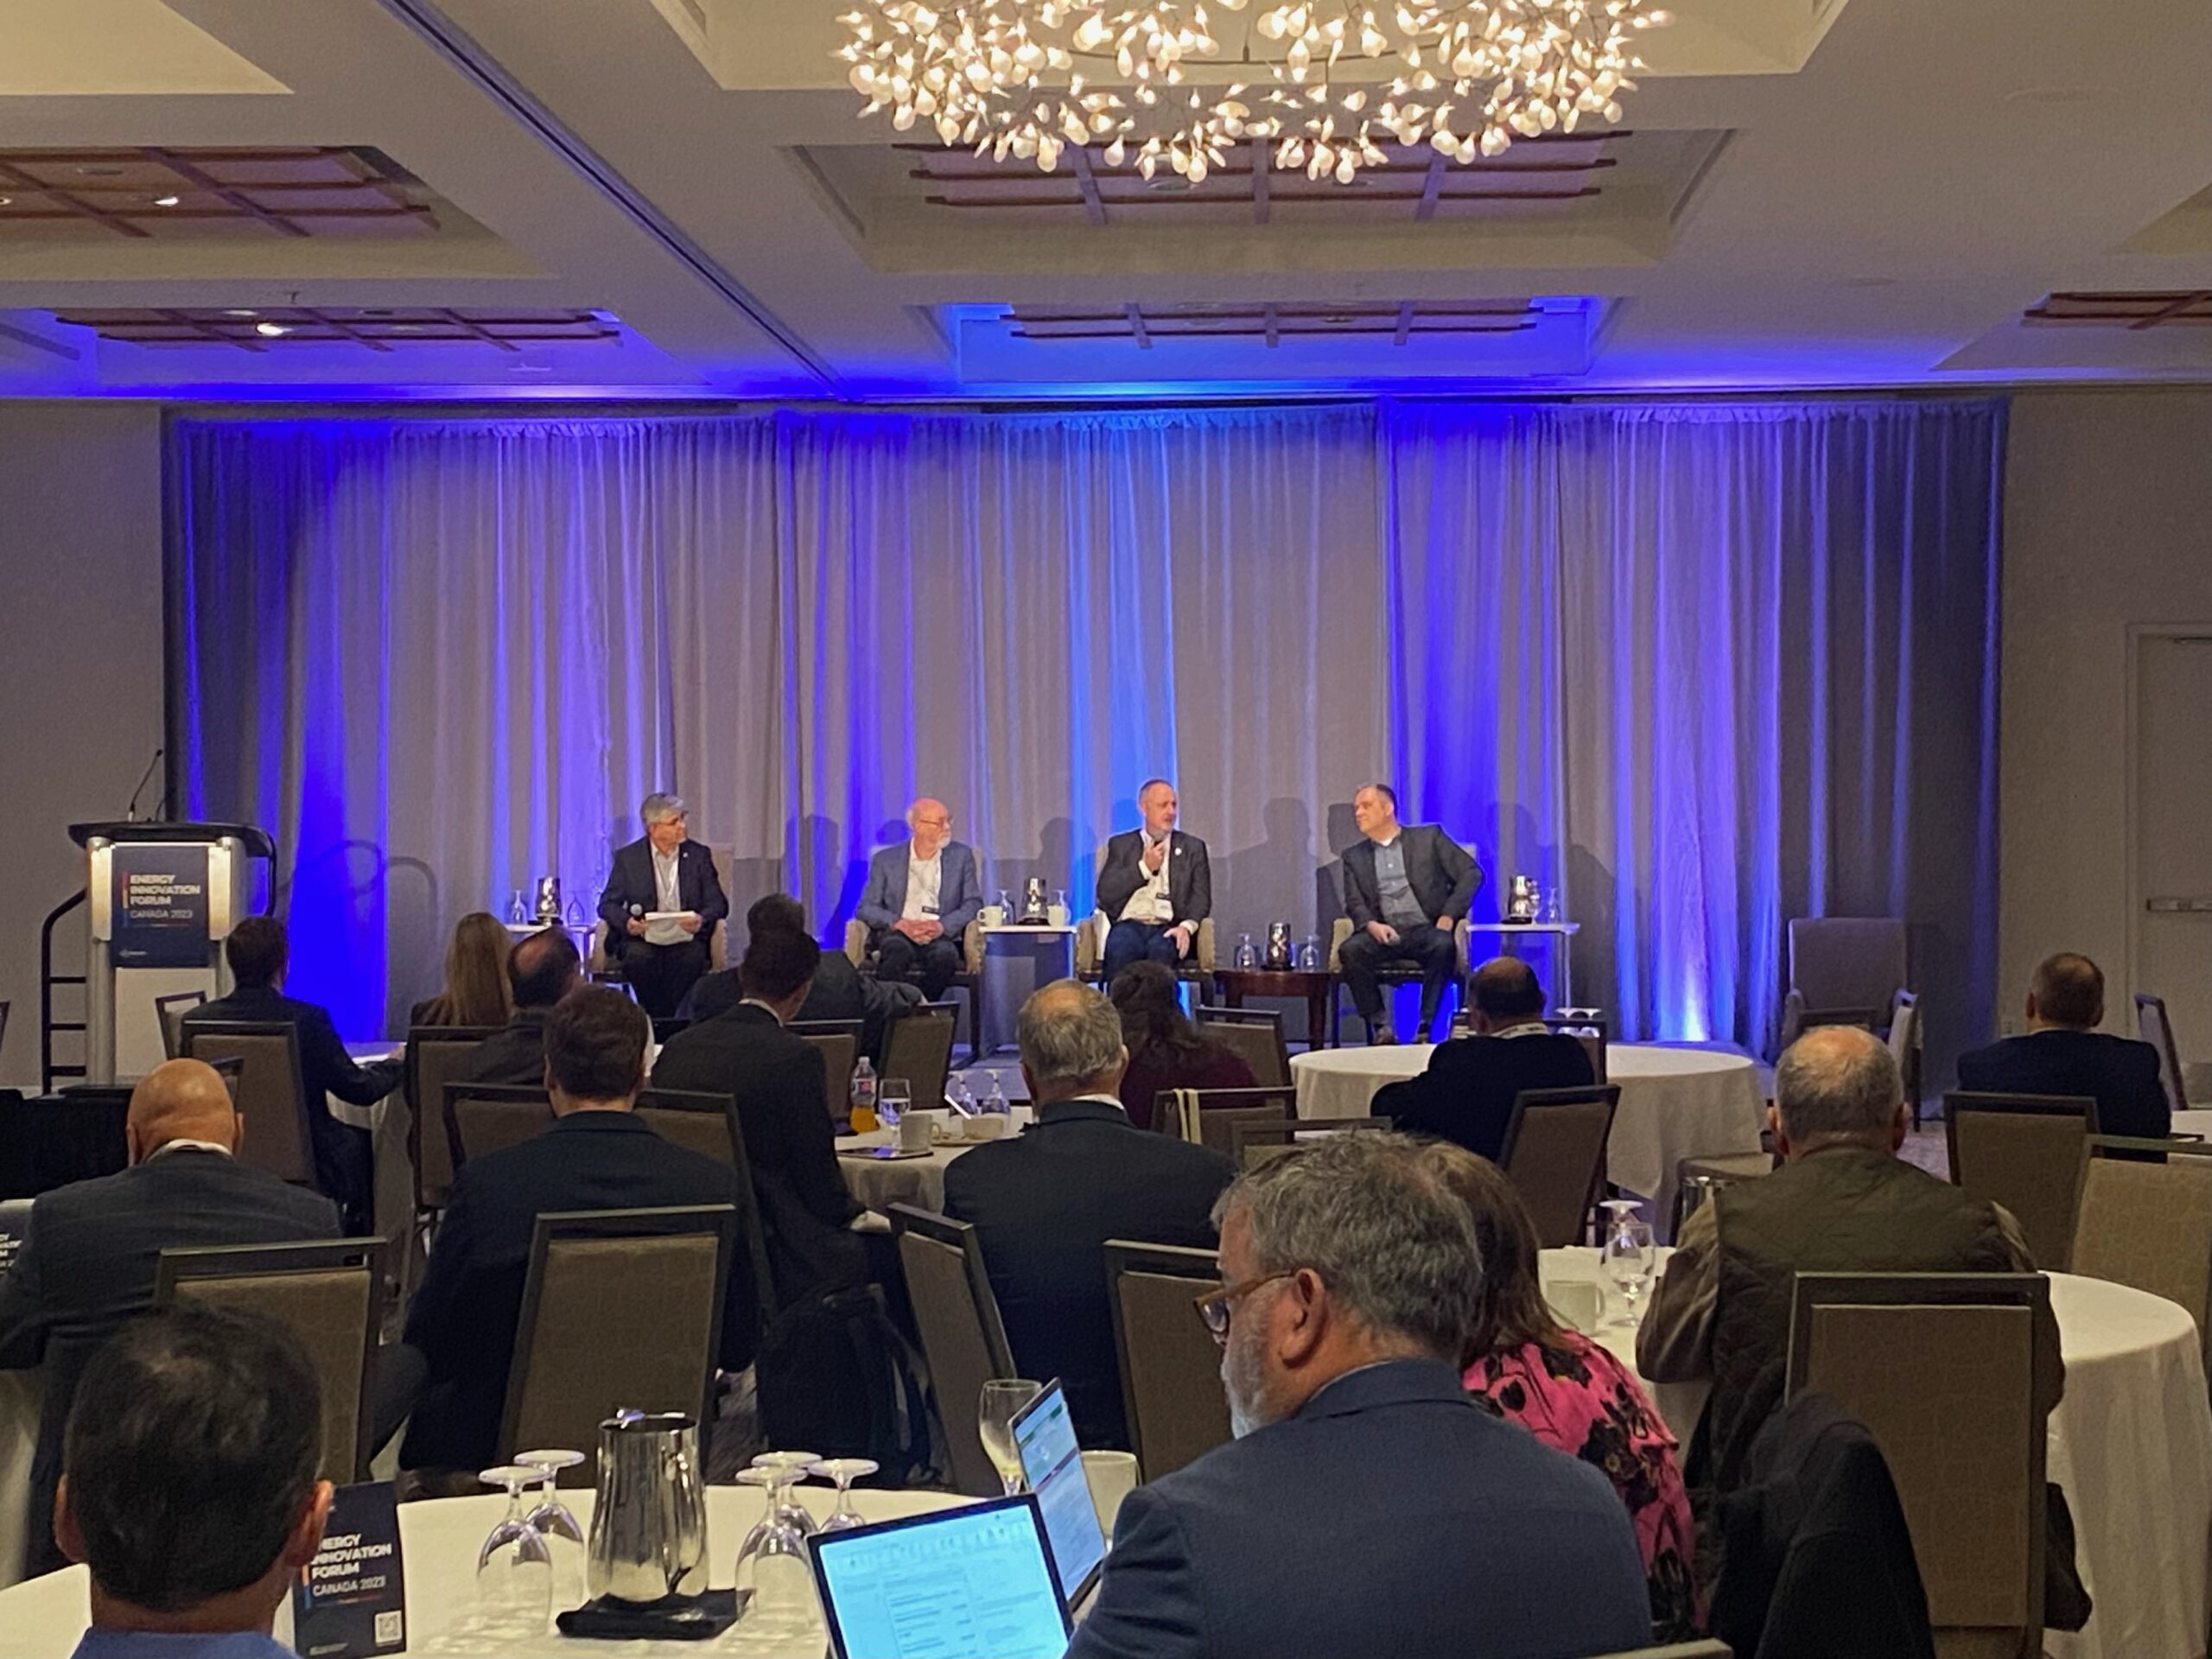 Electrification's Financial Solutions/Options featuring Ajit Parsasani (NRC), Bruce Cameron (Envigour Policy Consulting), Stuart Galloway (SOFIAC), Ted Leopkey (NB Power)